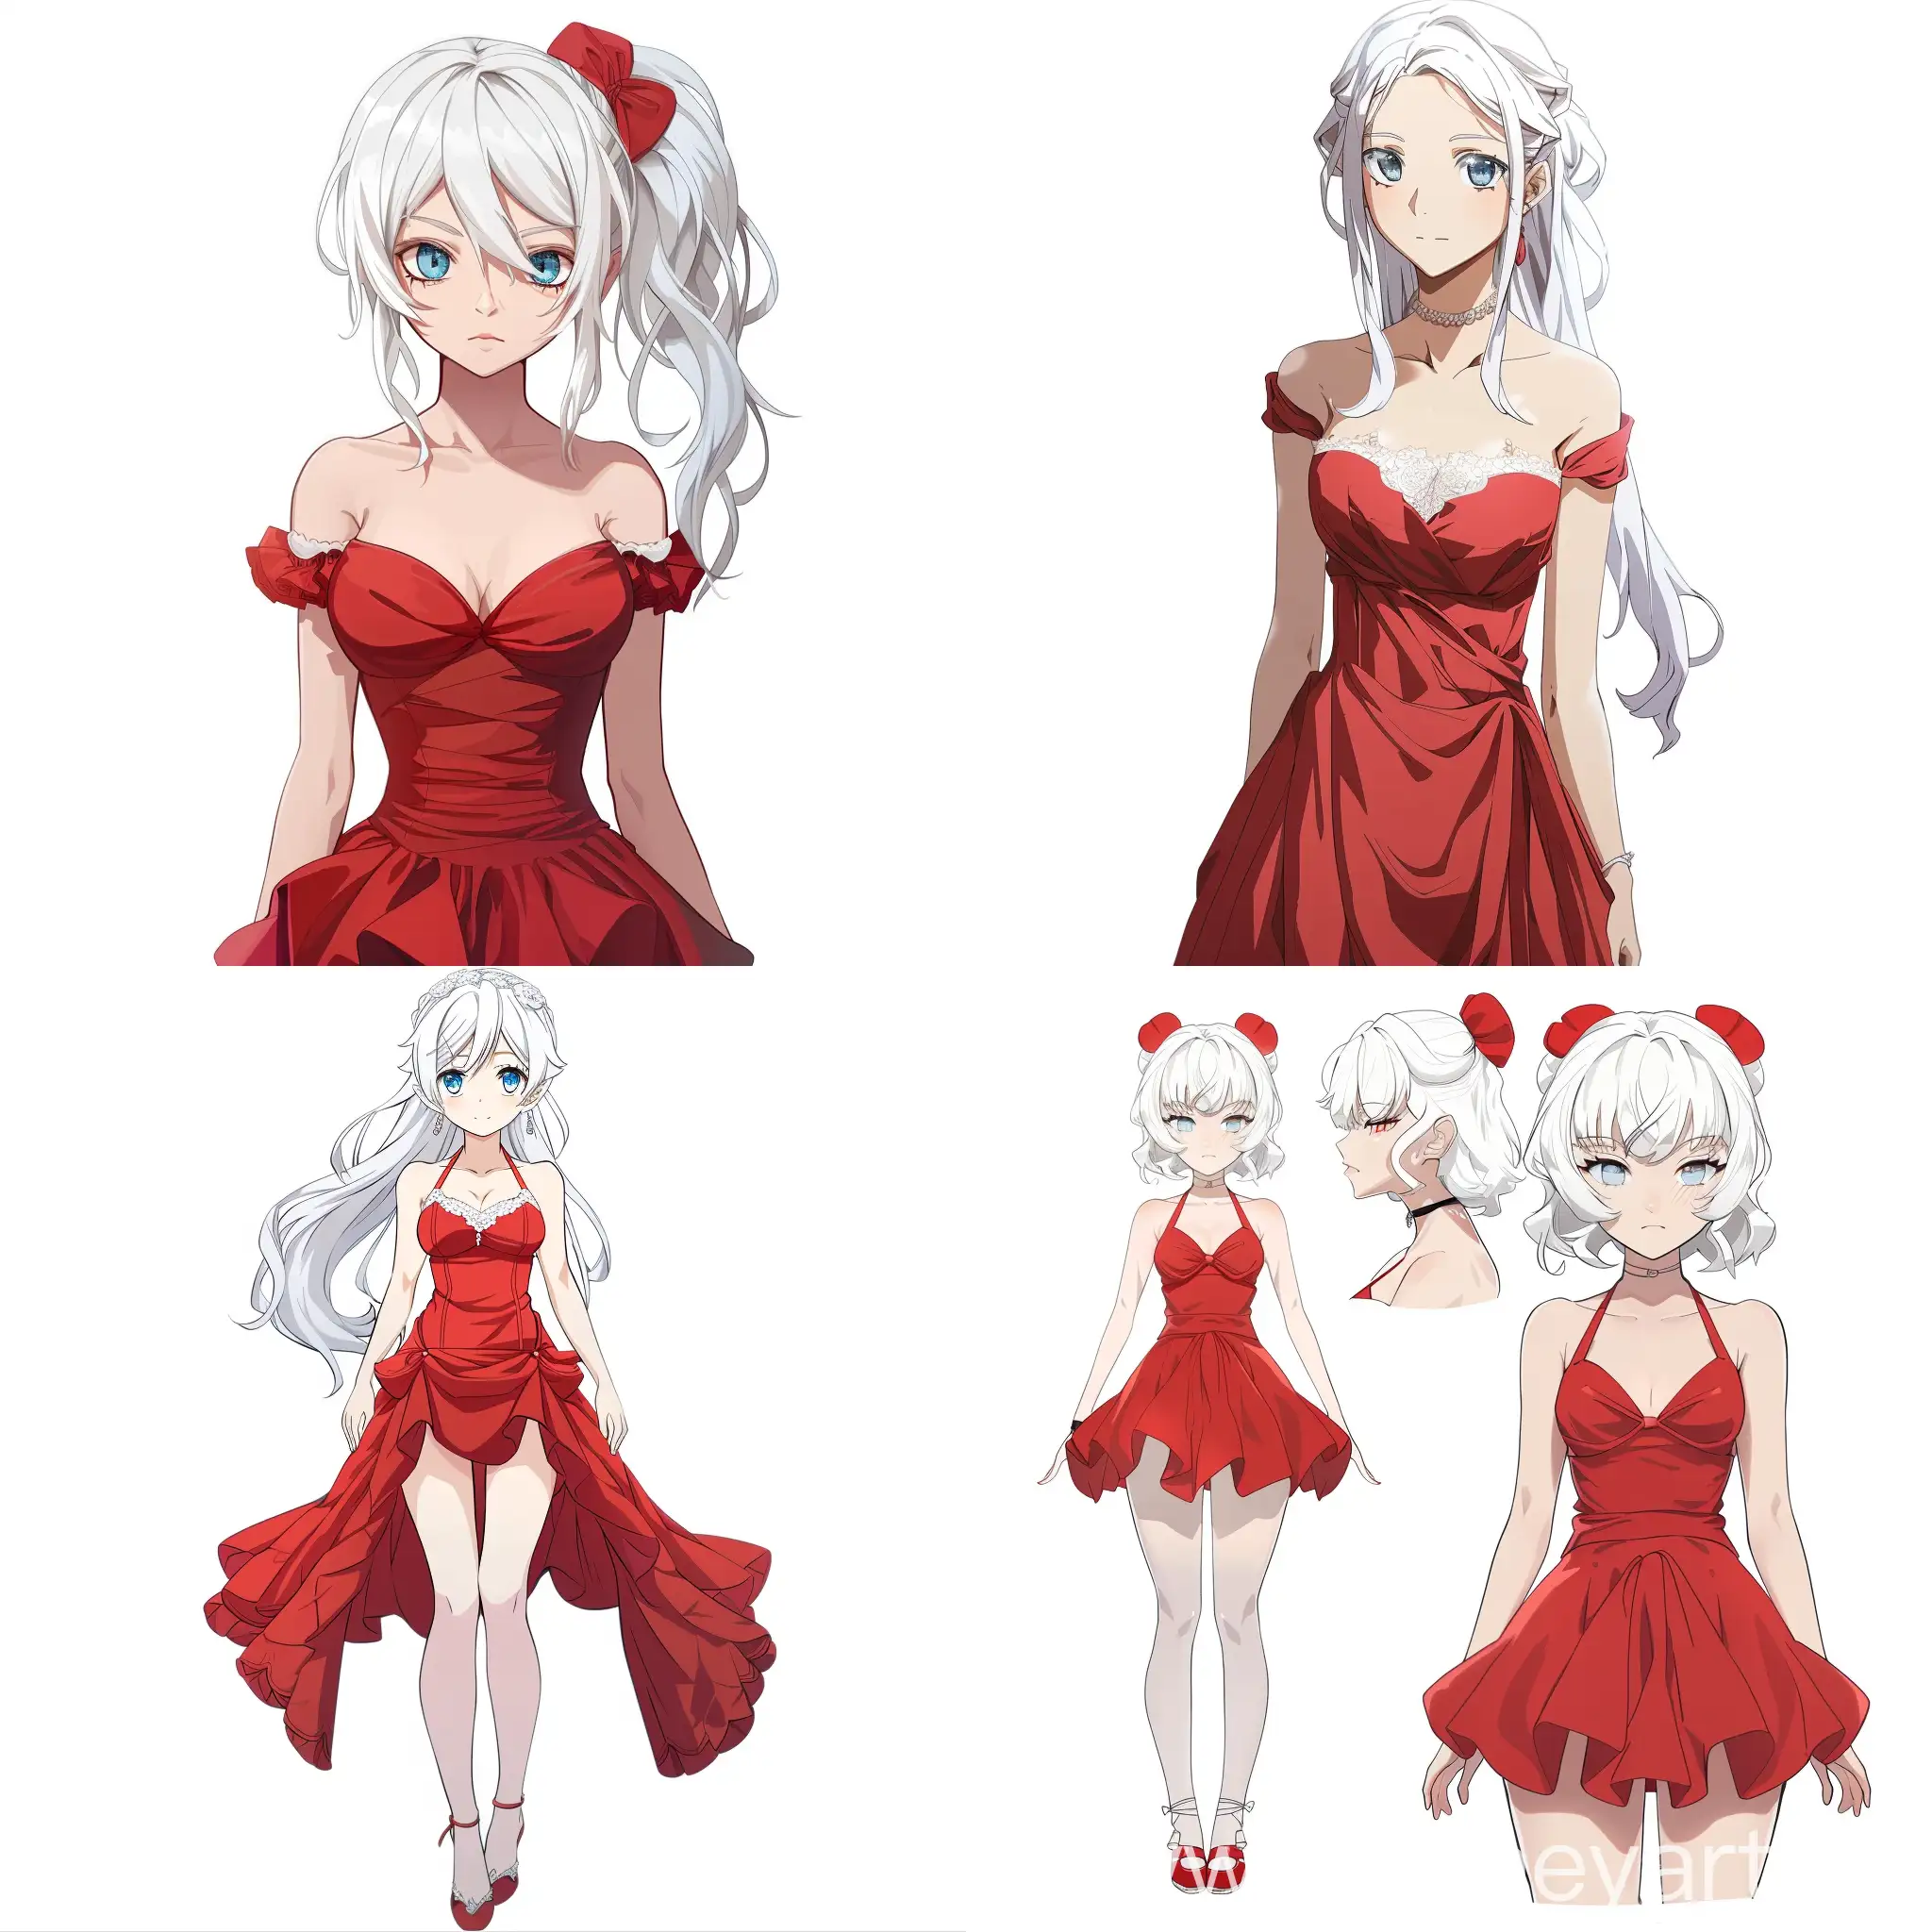 character reference on white background, OC reference, original character, original full-length character, one white-haired girl in a red dress, fantasy au, anime style, forehead, blue eyes and white skin